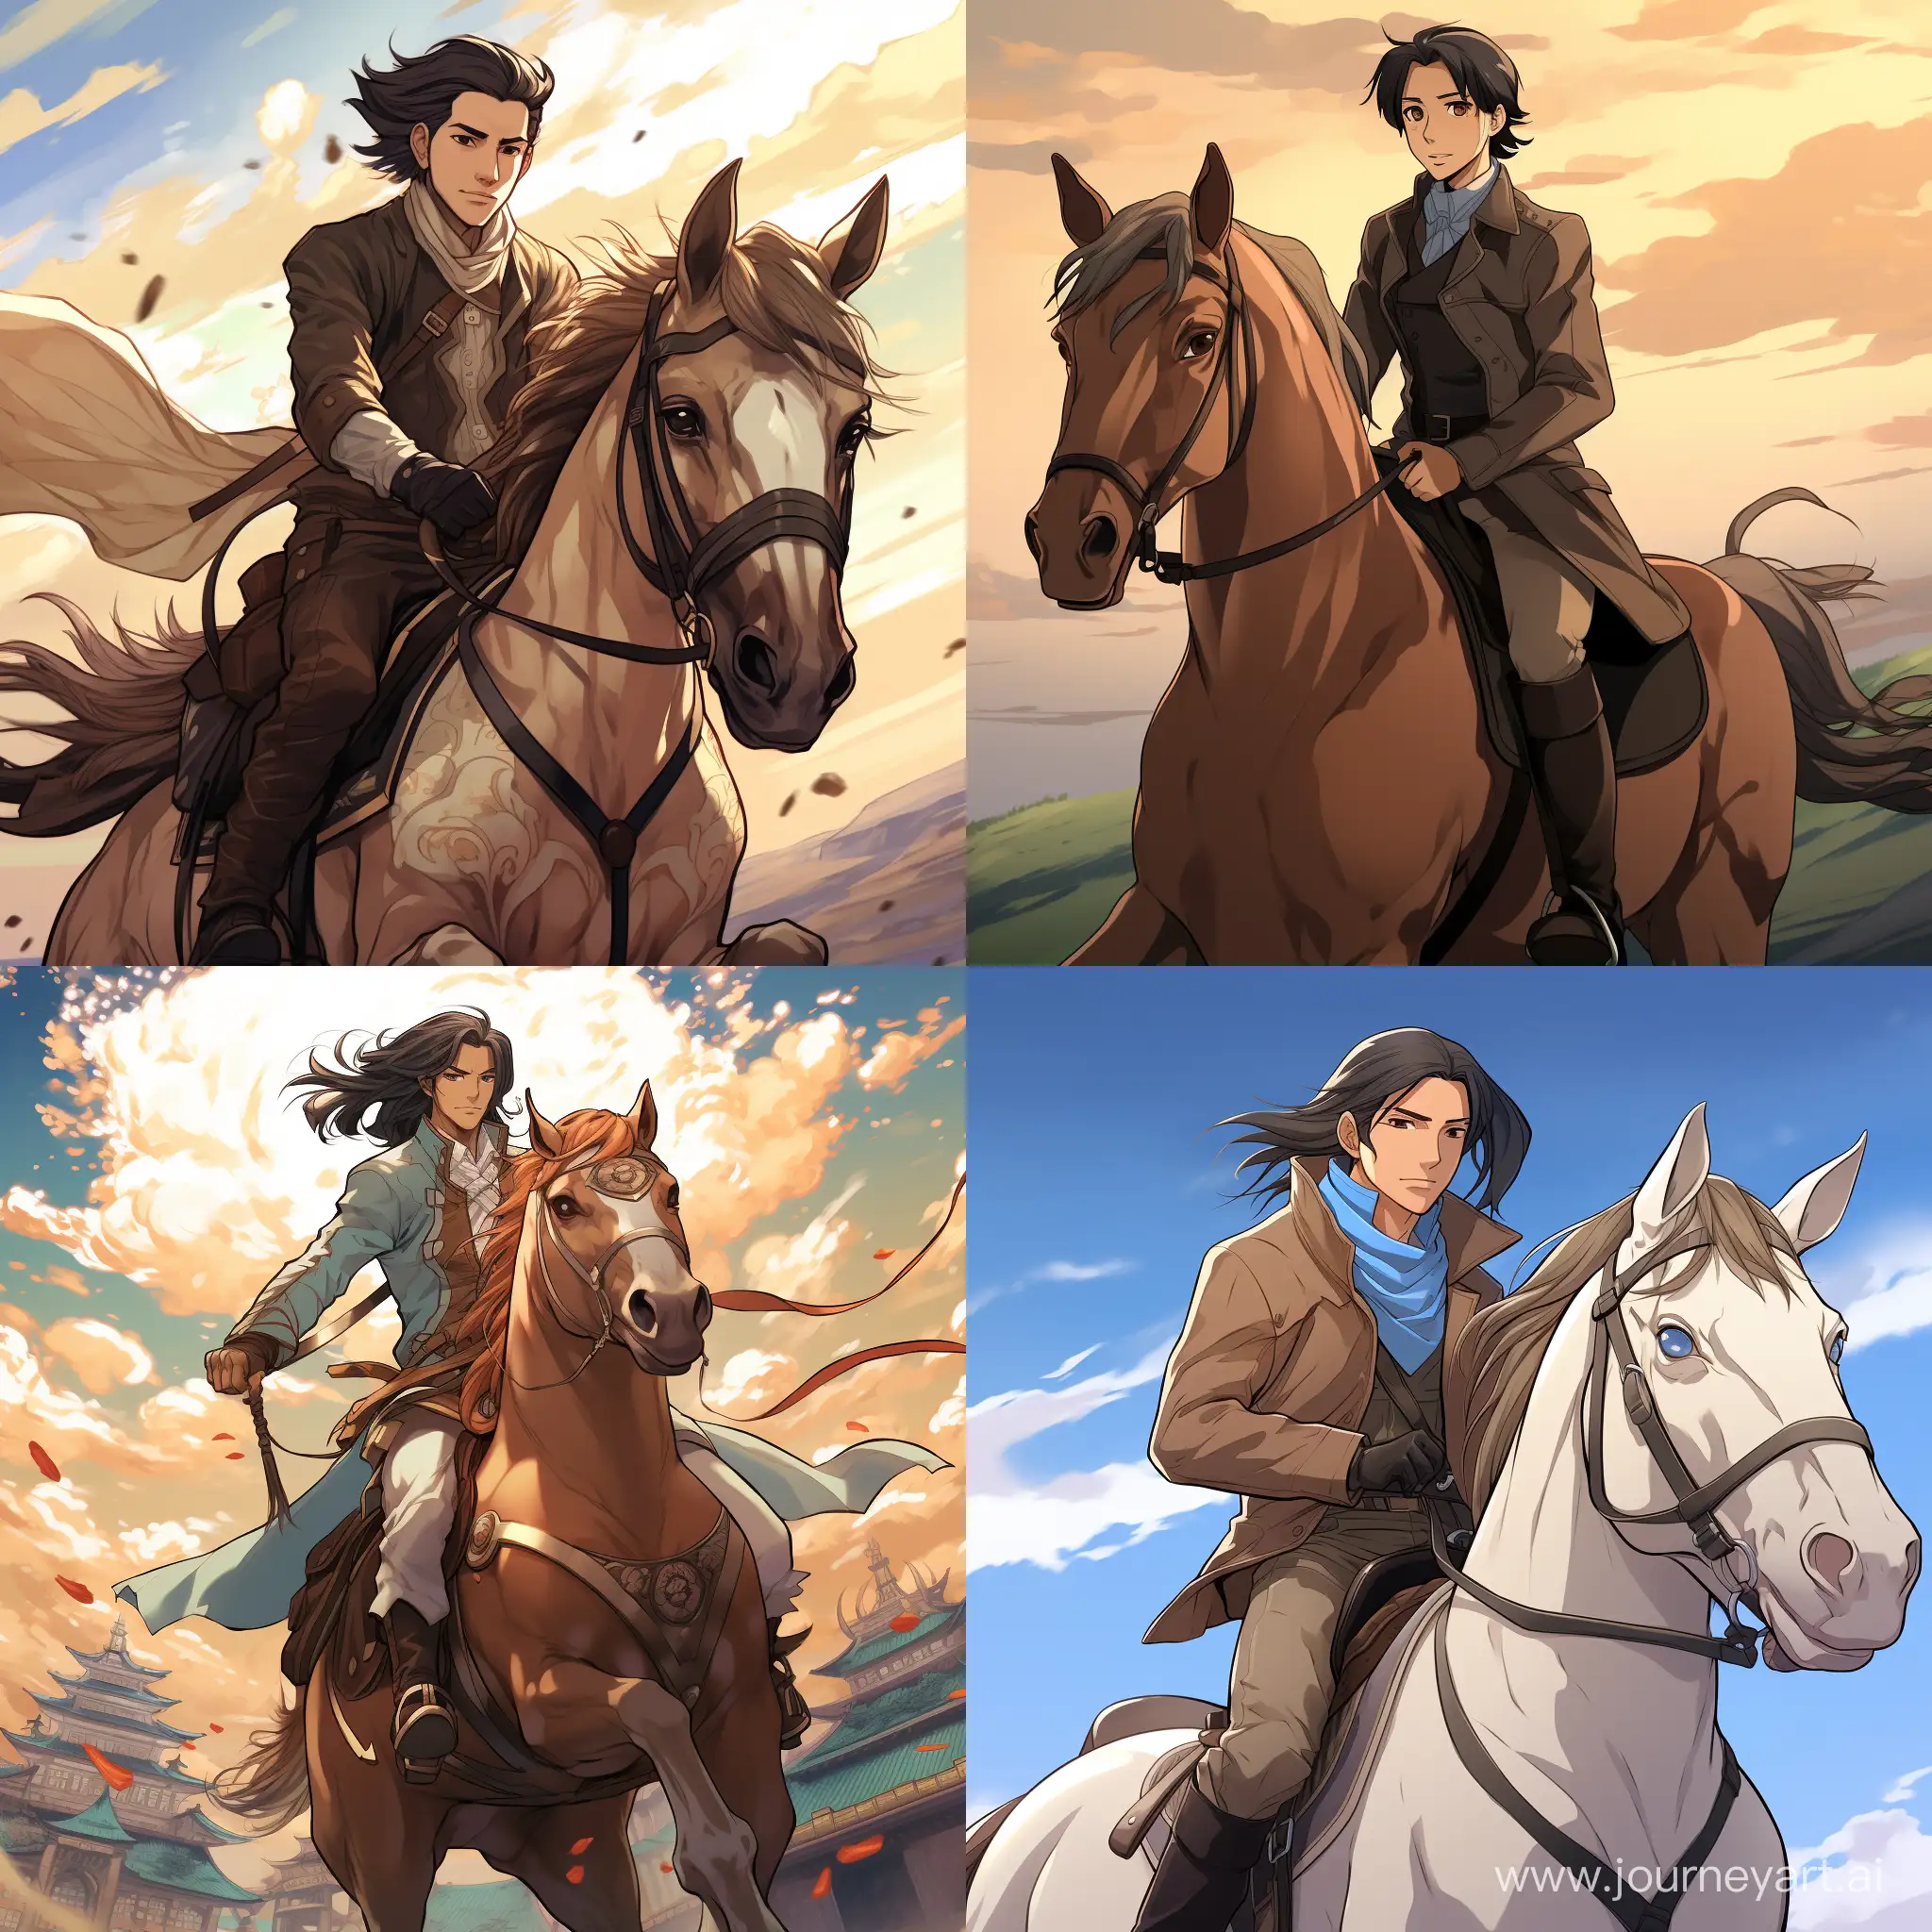 a man is riding horse, anime style